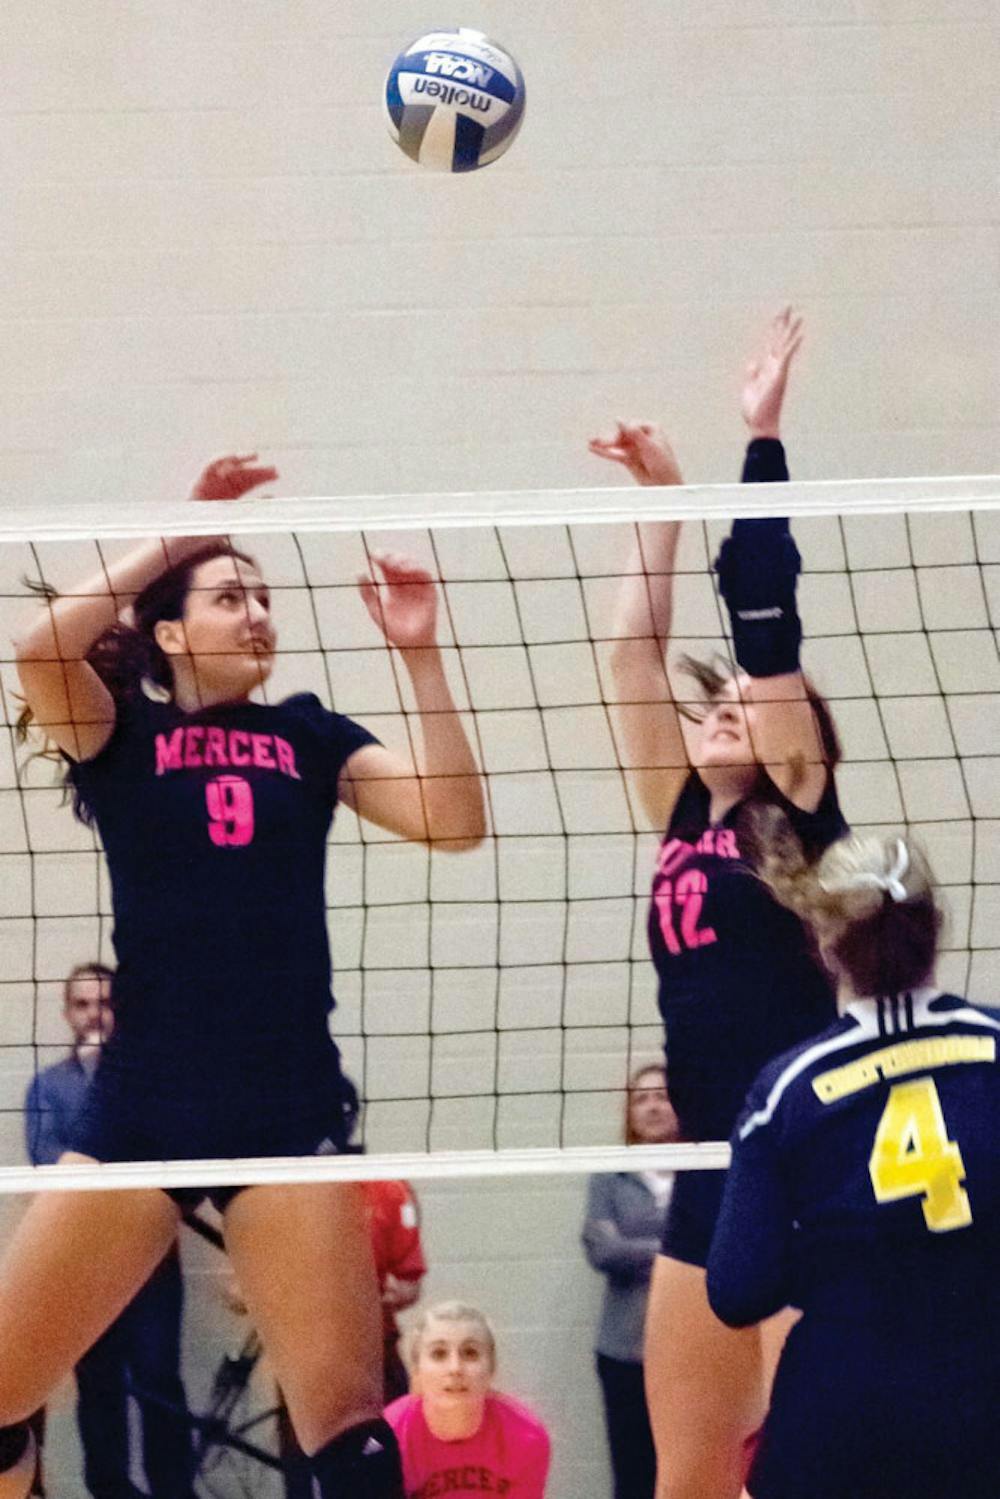 Middle blocker Paige Alsten and outside hitter Morgan MacGilvary jump to block the ball in their Oct. 29 match against University of Tennessee Chattanooga. The bears wore pink in recognition of Breast Cancer Awareness Month.